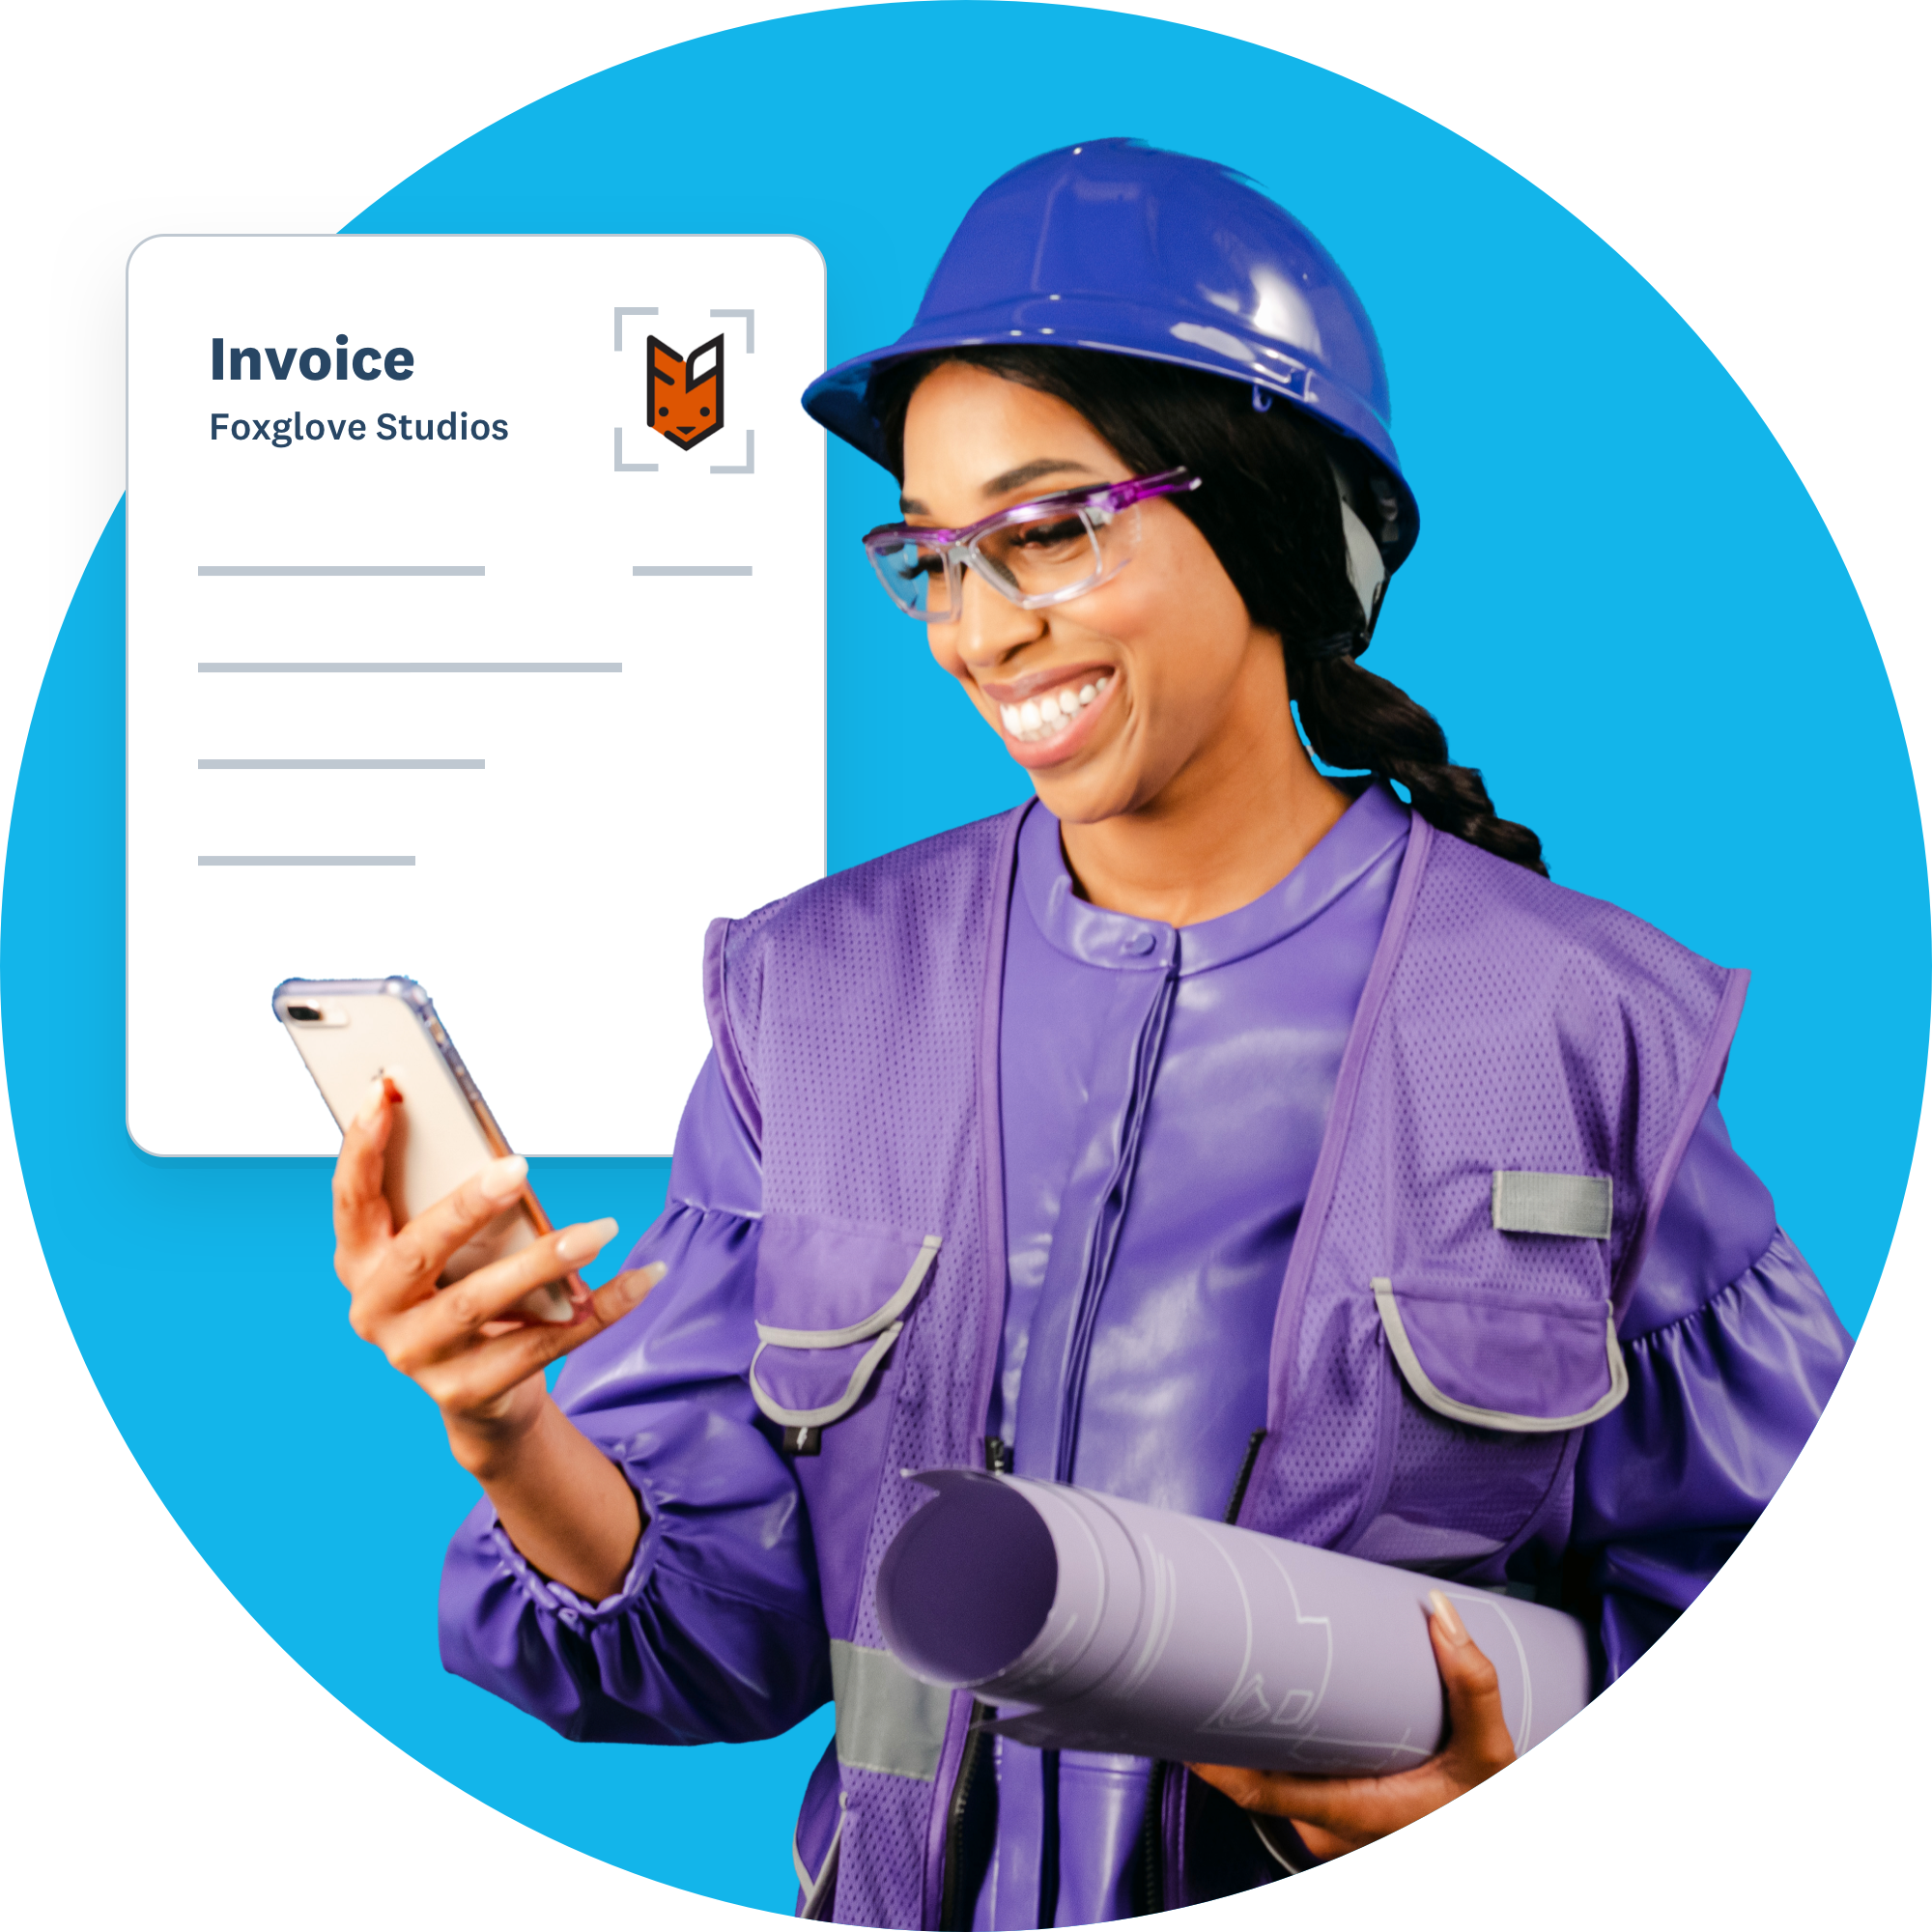 Woman wearing hardhat, safety glasses, construction site vest and holding blueprints while looking at invoice on her phone.